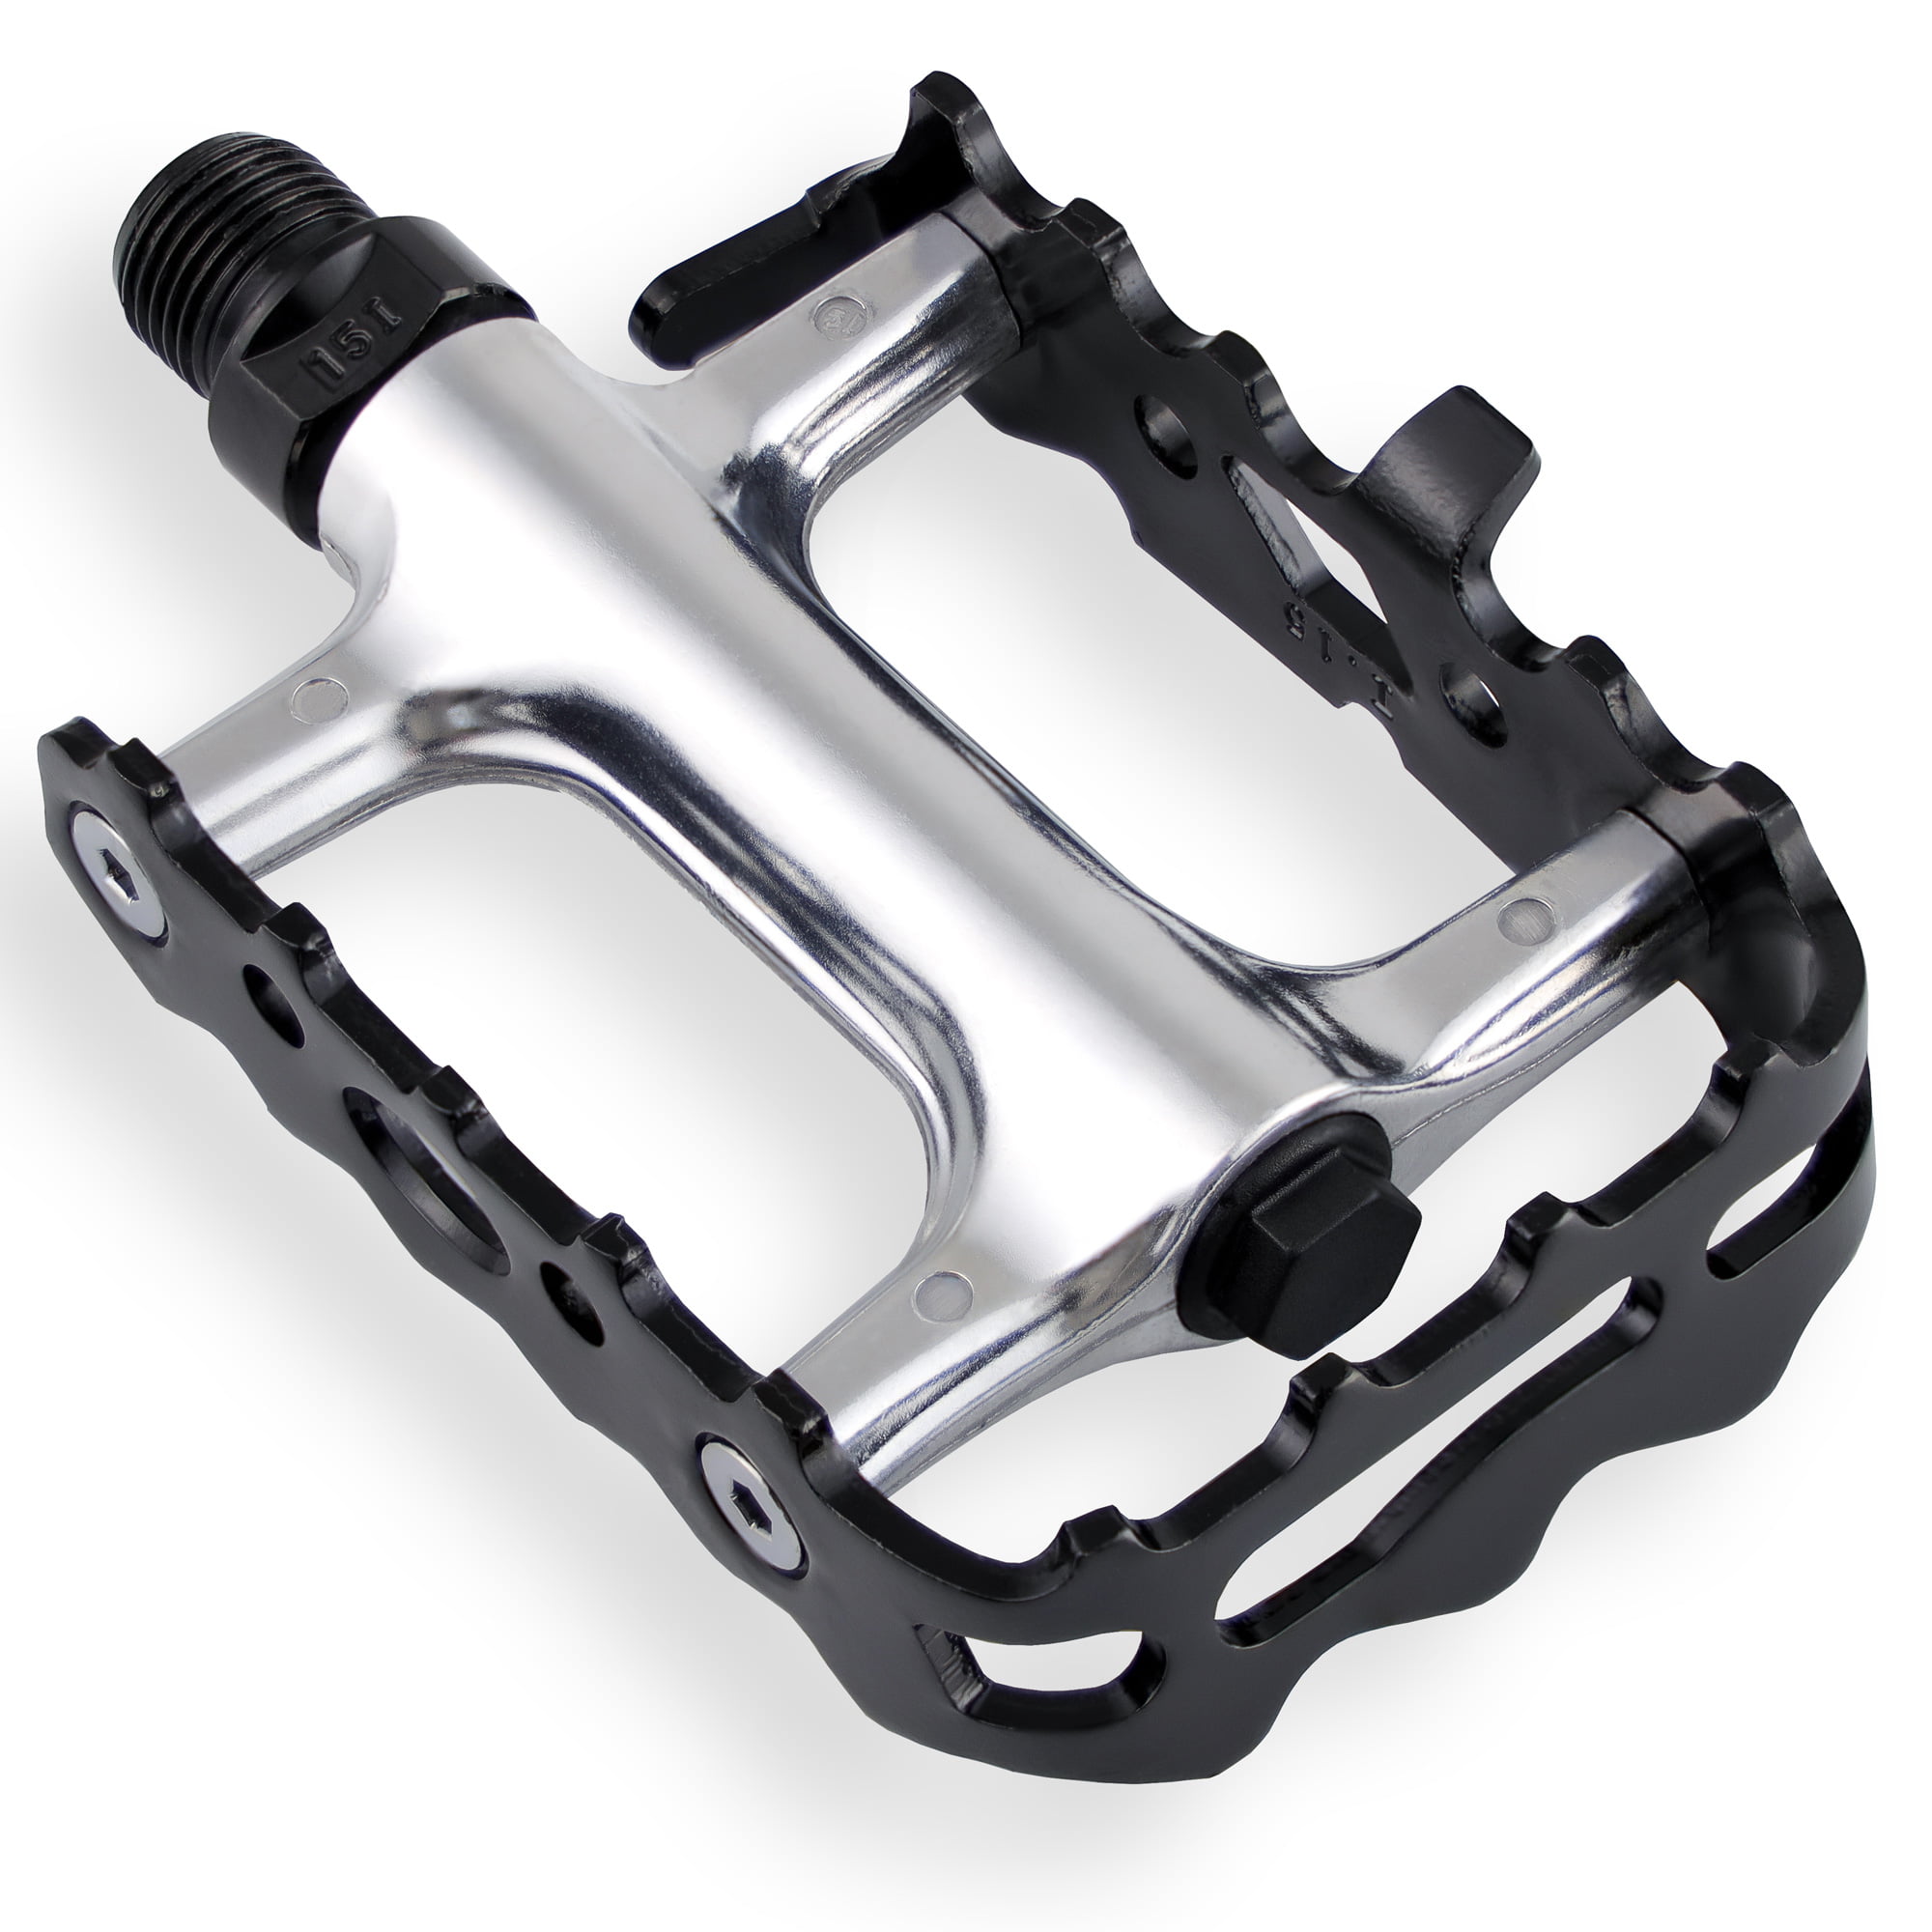 BICYCLE STEEL PEDALS 616 IN CHROME COMPATIBLE WITH 1/2 CRANK. NEW 